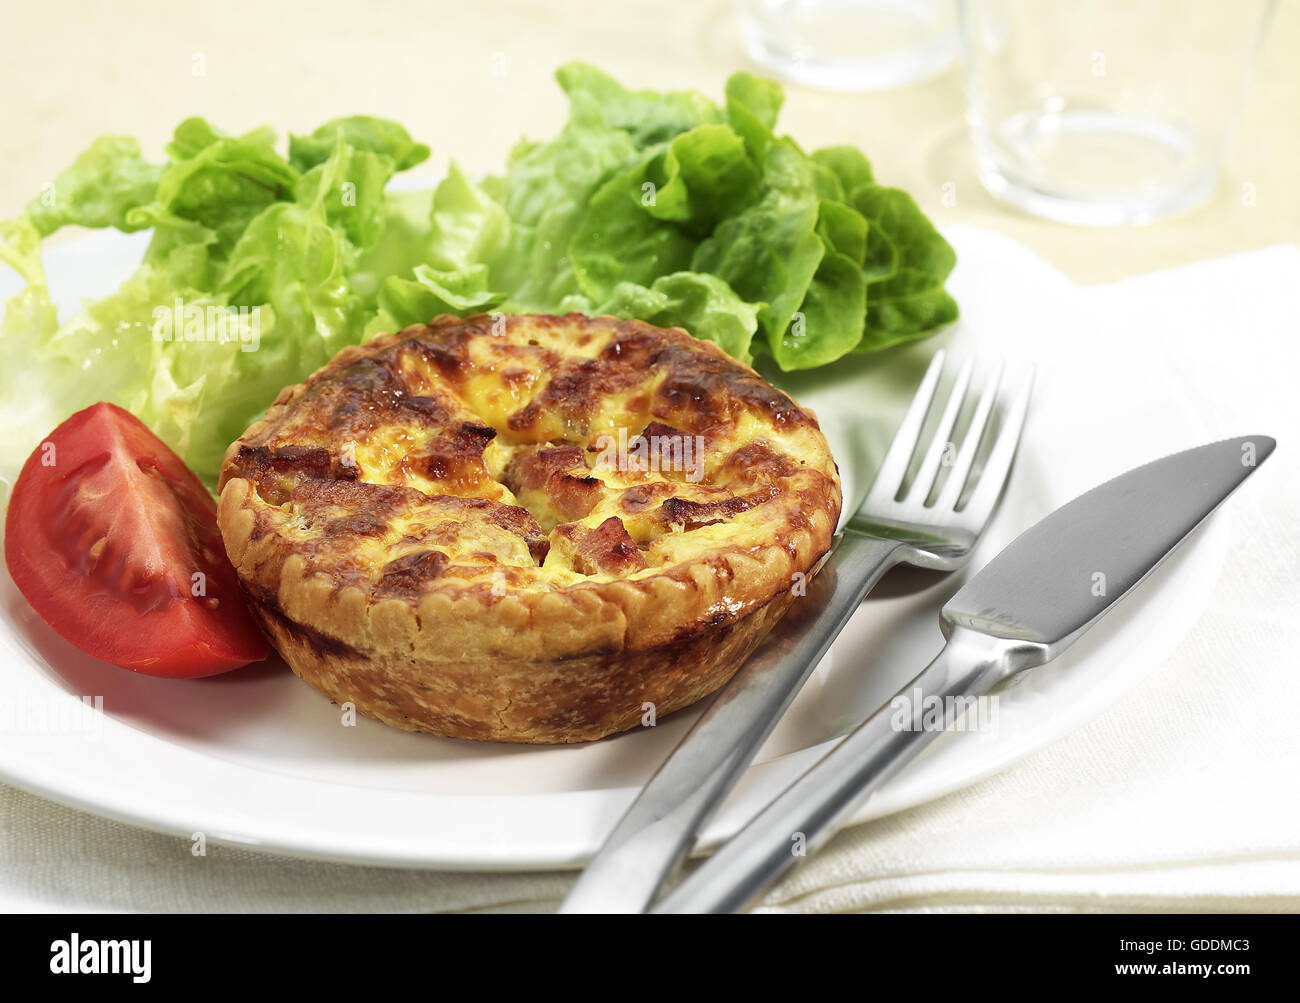 Plate with Leek Quiche and Tomatoe Stock Photo